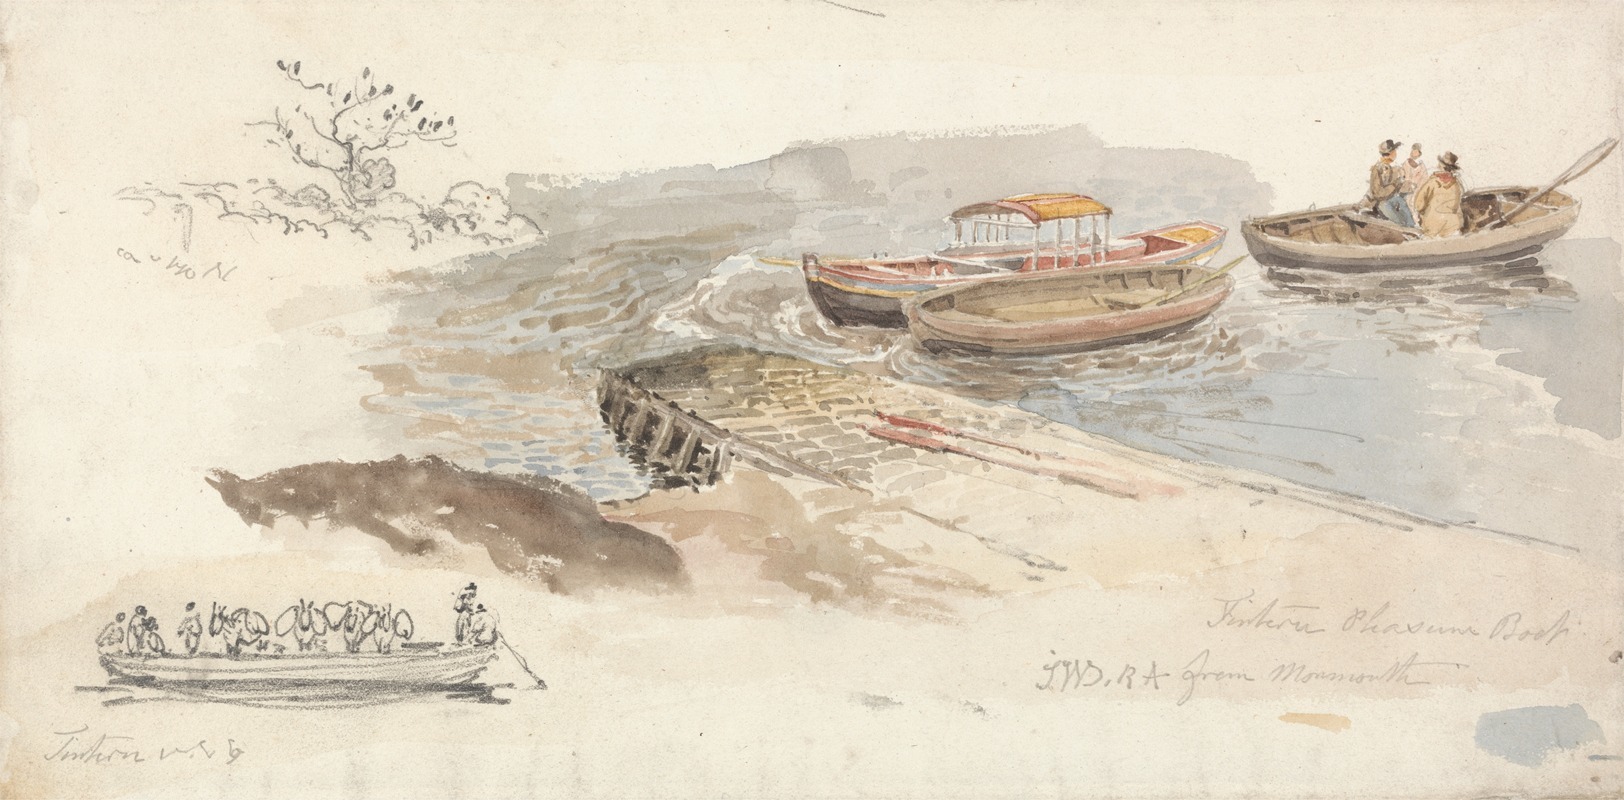 James Ward - A Canopied Boat and Two Rowing Boats at a Jetty; Inset Left, a Pencil Study of the Tintern Livestock Ferry-boat